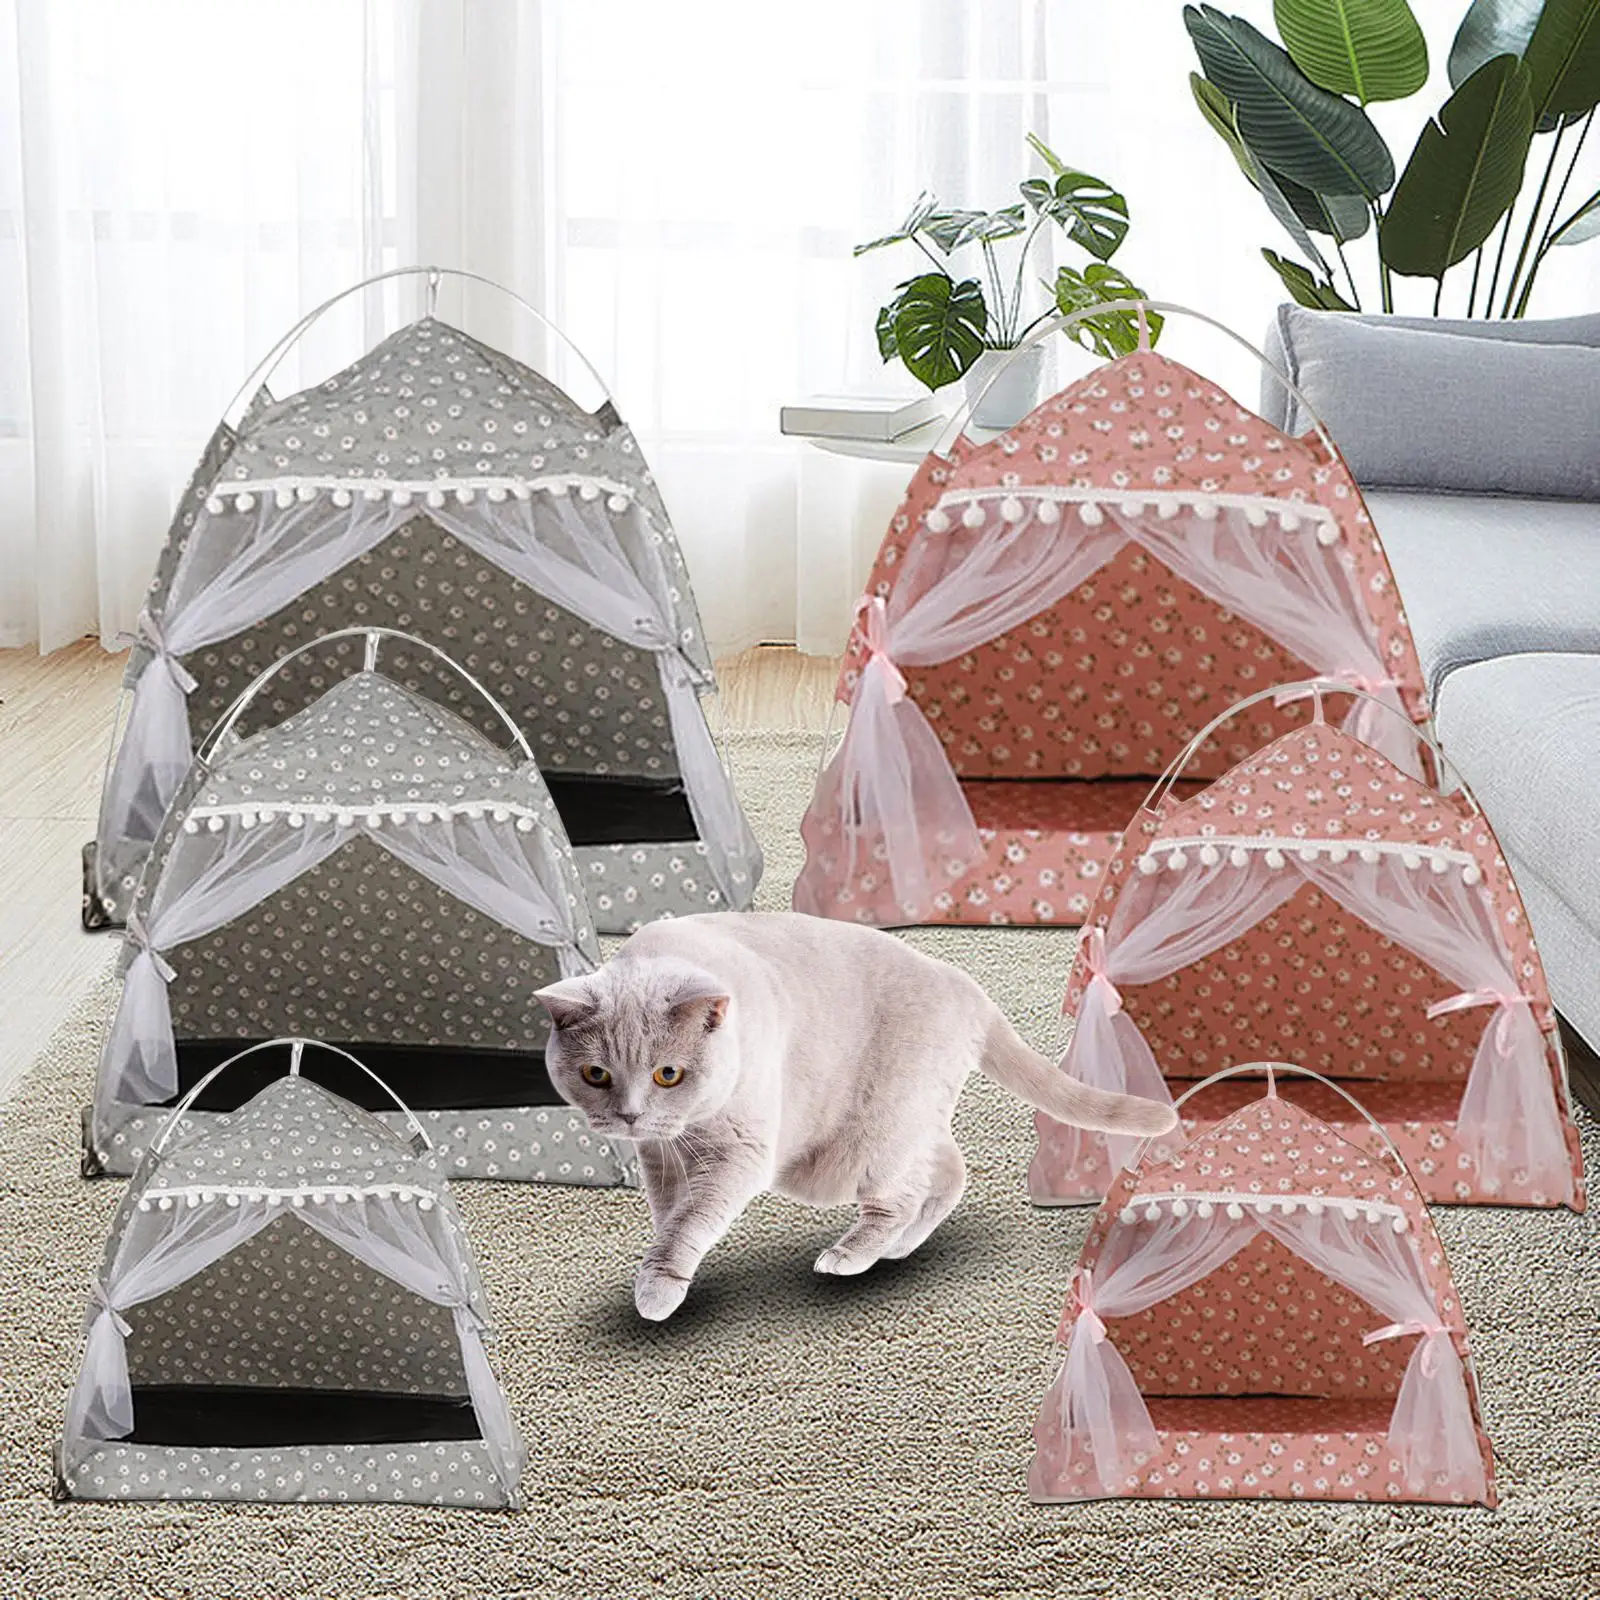 Large Cat tent Puppy Mat Cushion Nest Kennel Basket Bed for Kitten Thick Indoor Warm Dog